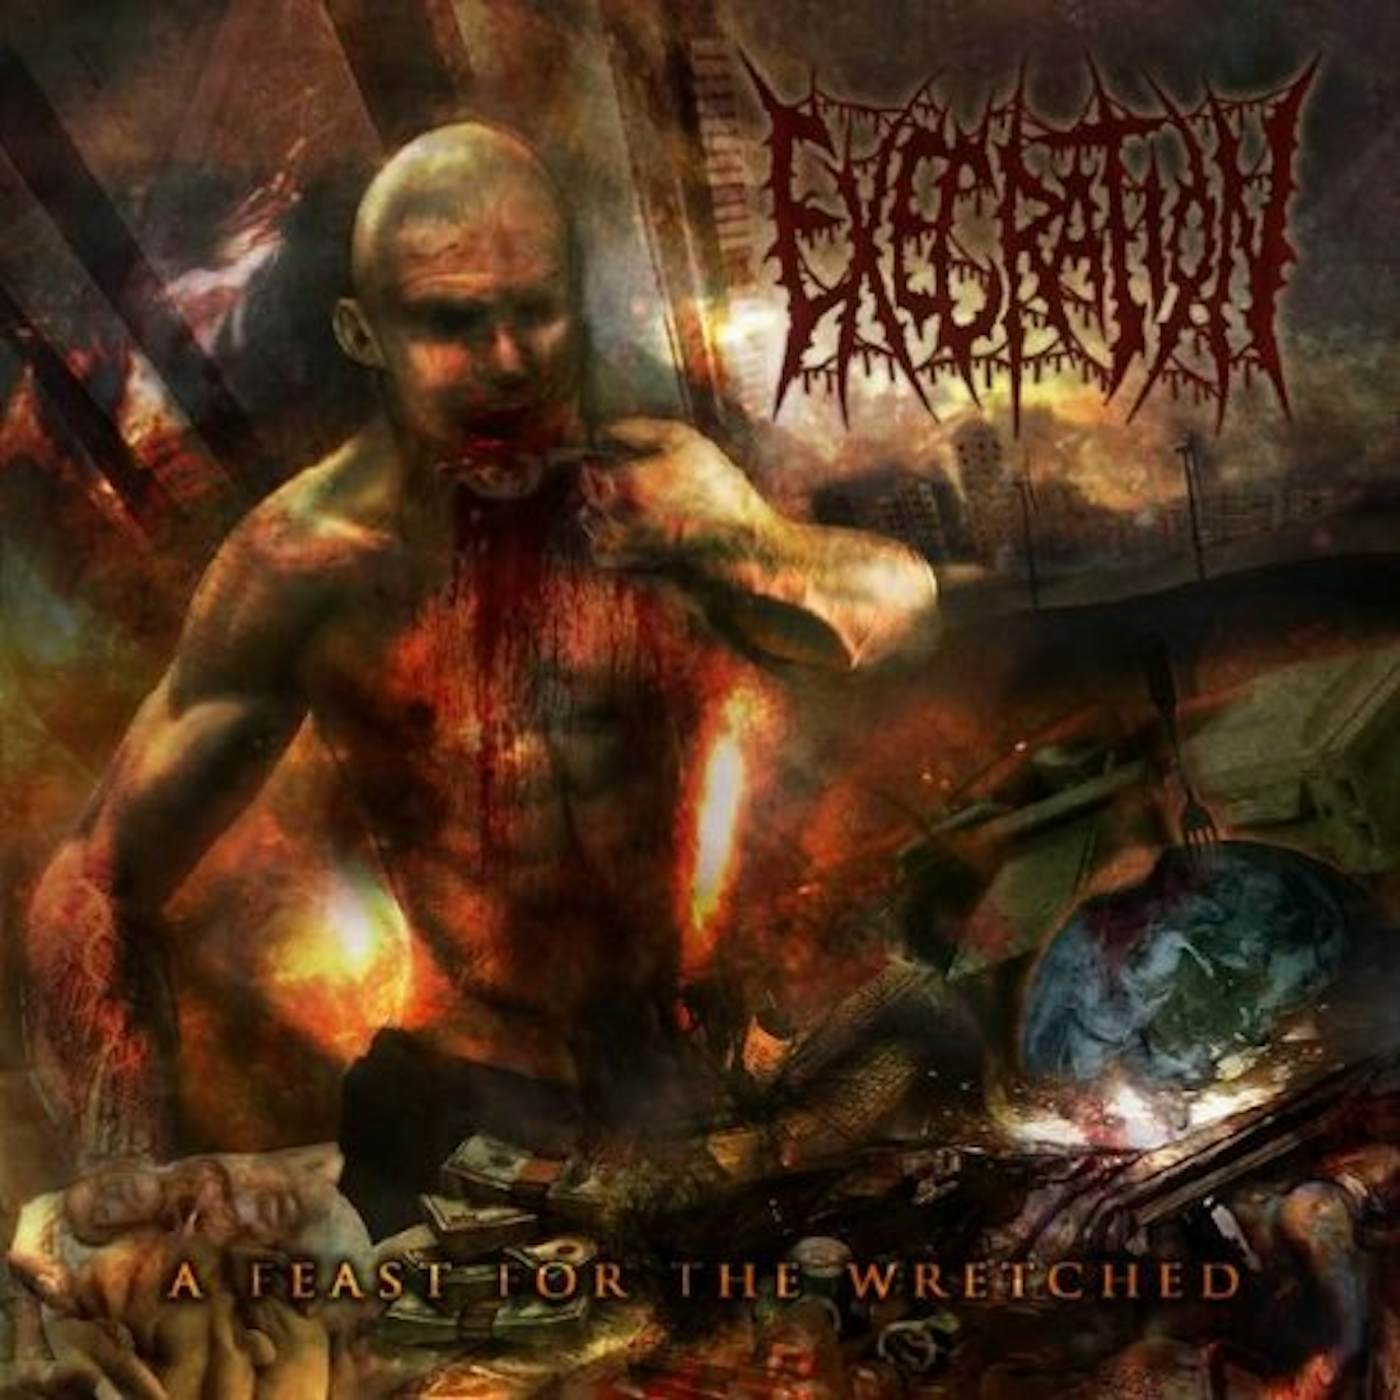 Execration FEAST FOR THE WRETCHED CD